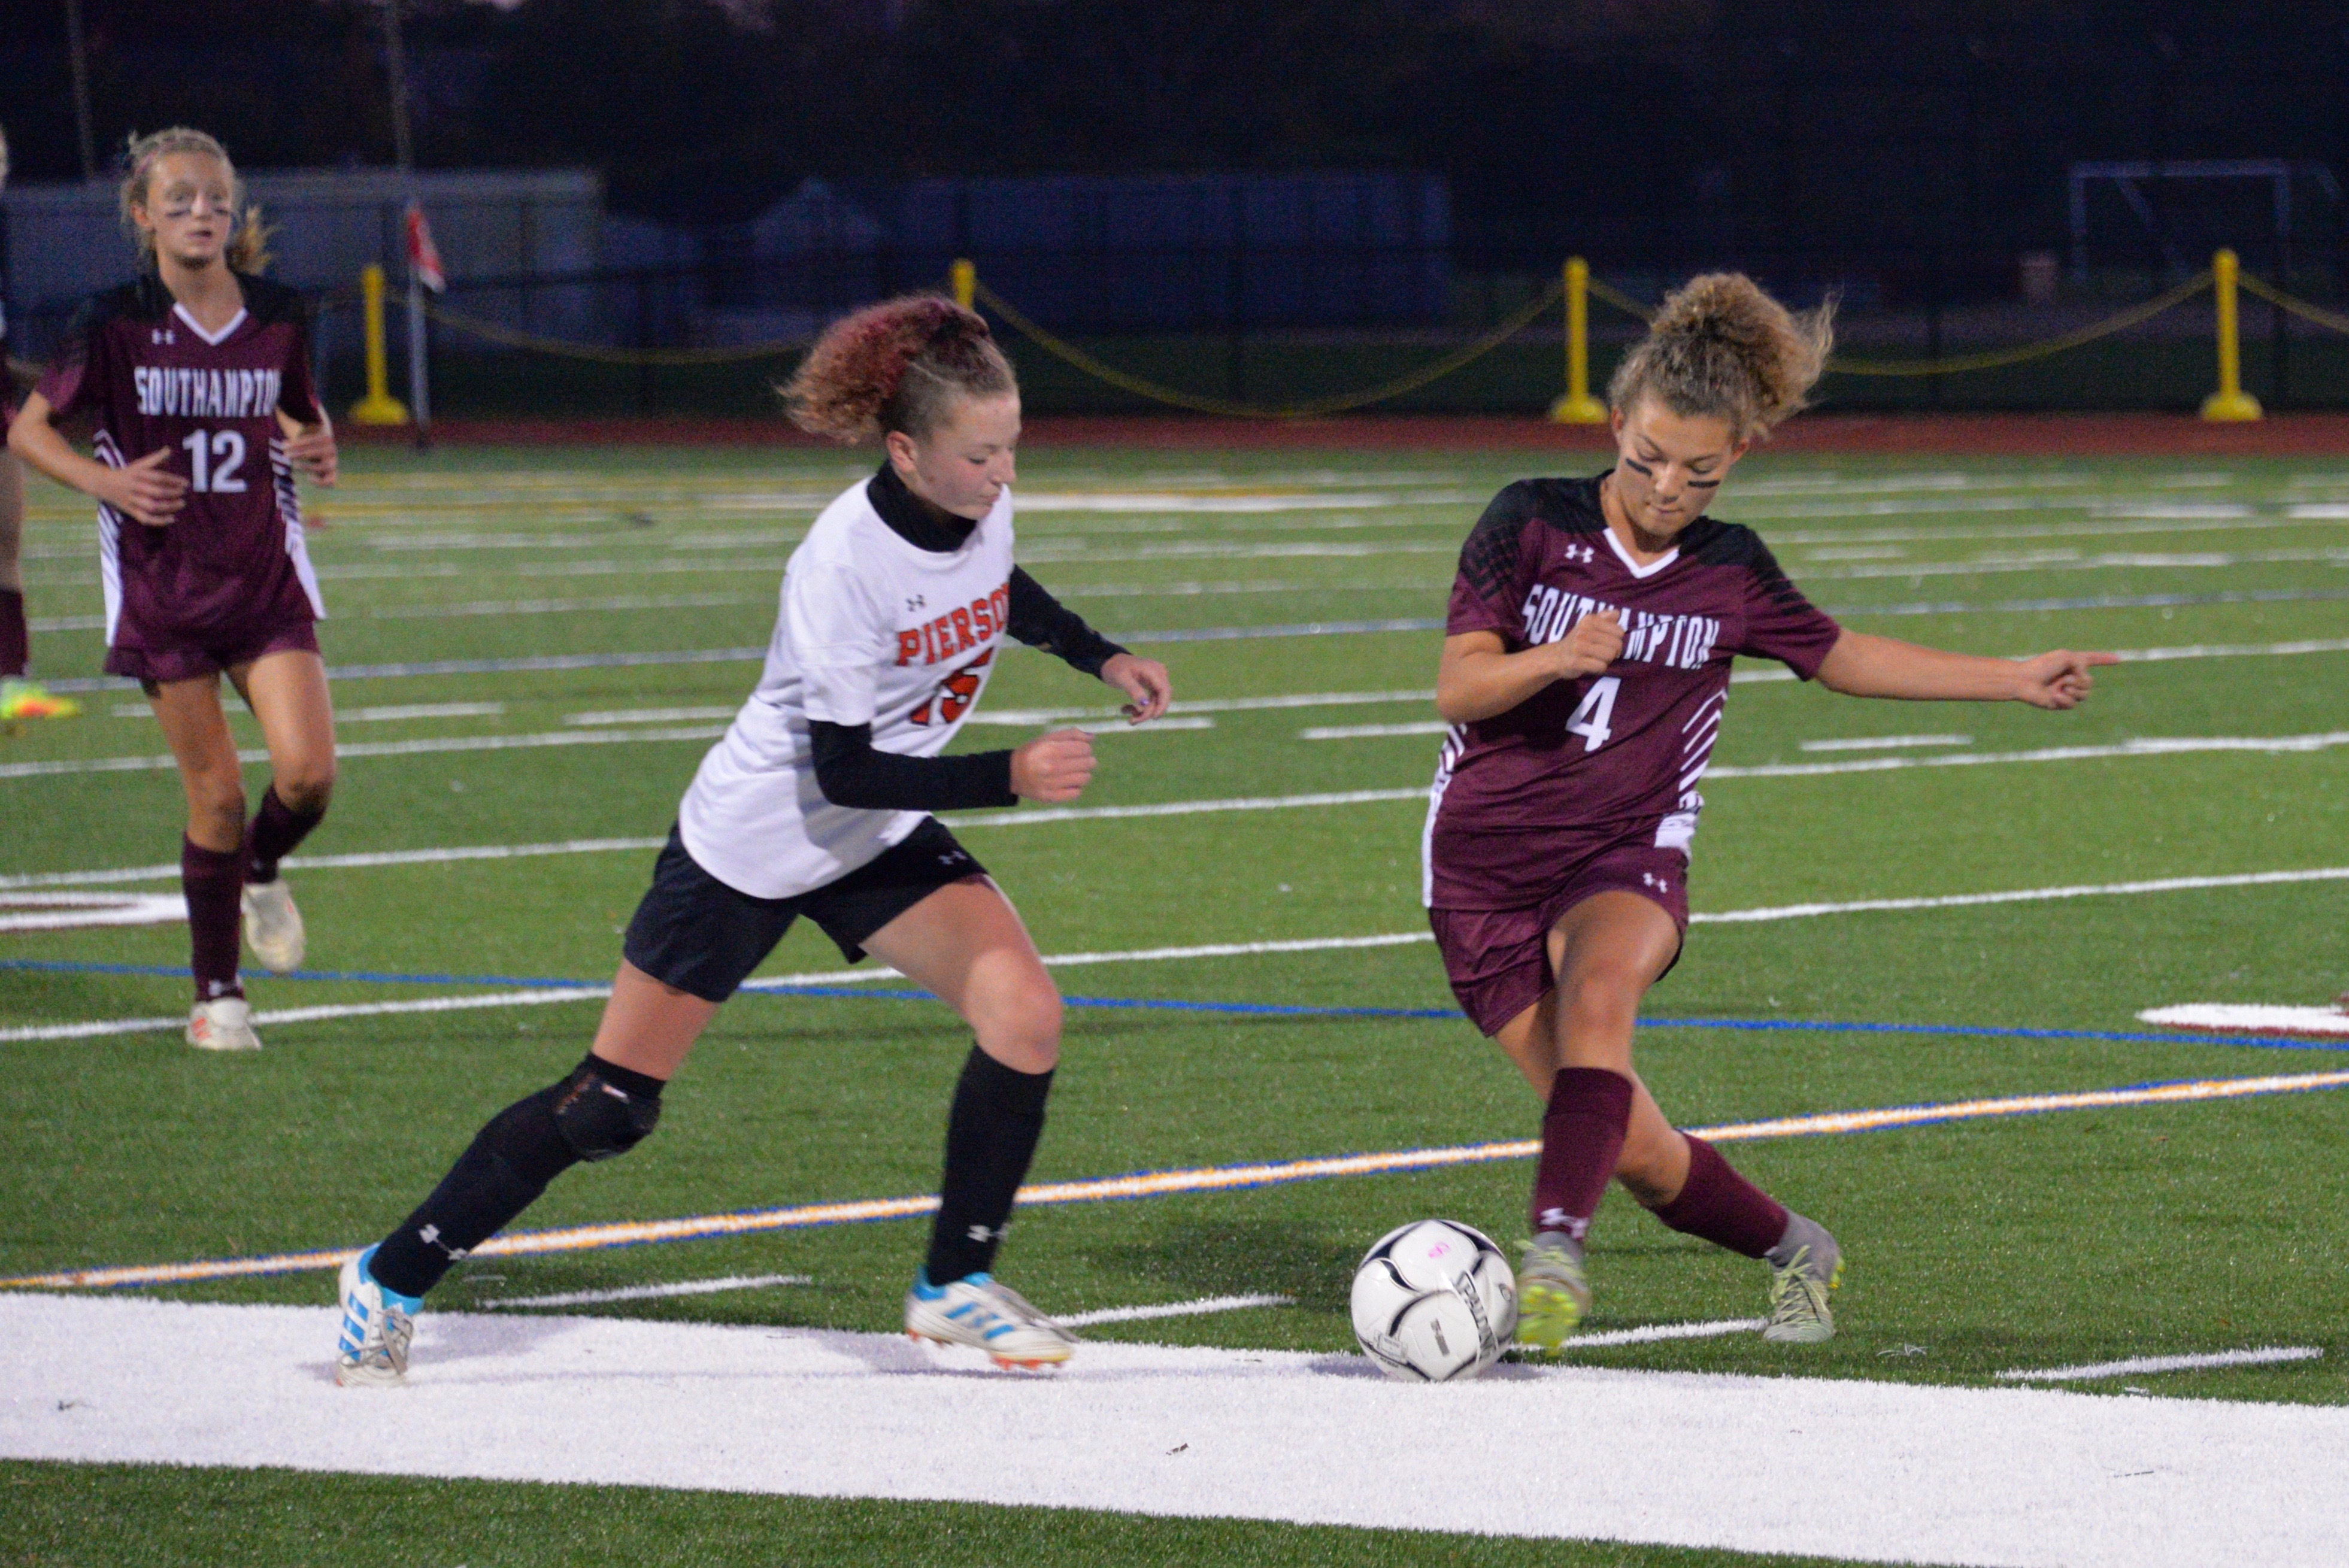 Southampton's Gabriella Arnold works the ball with Pierson's Delaina Healy on her.